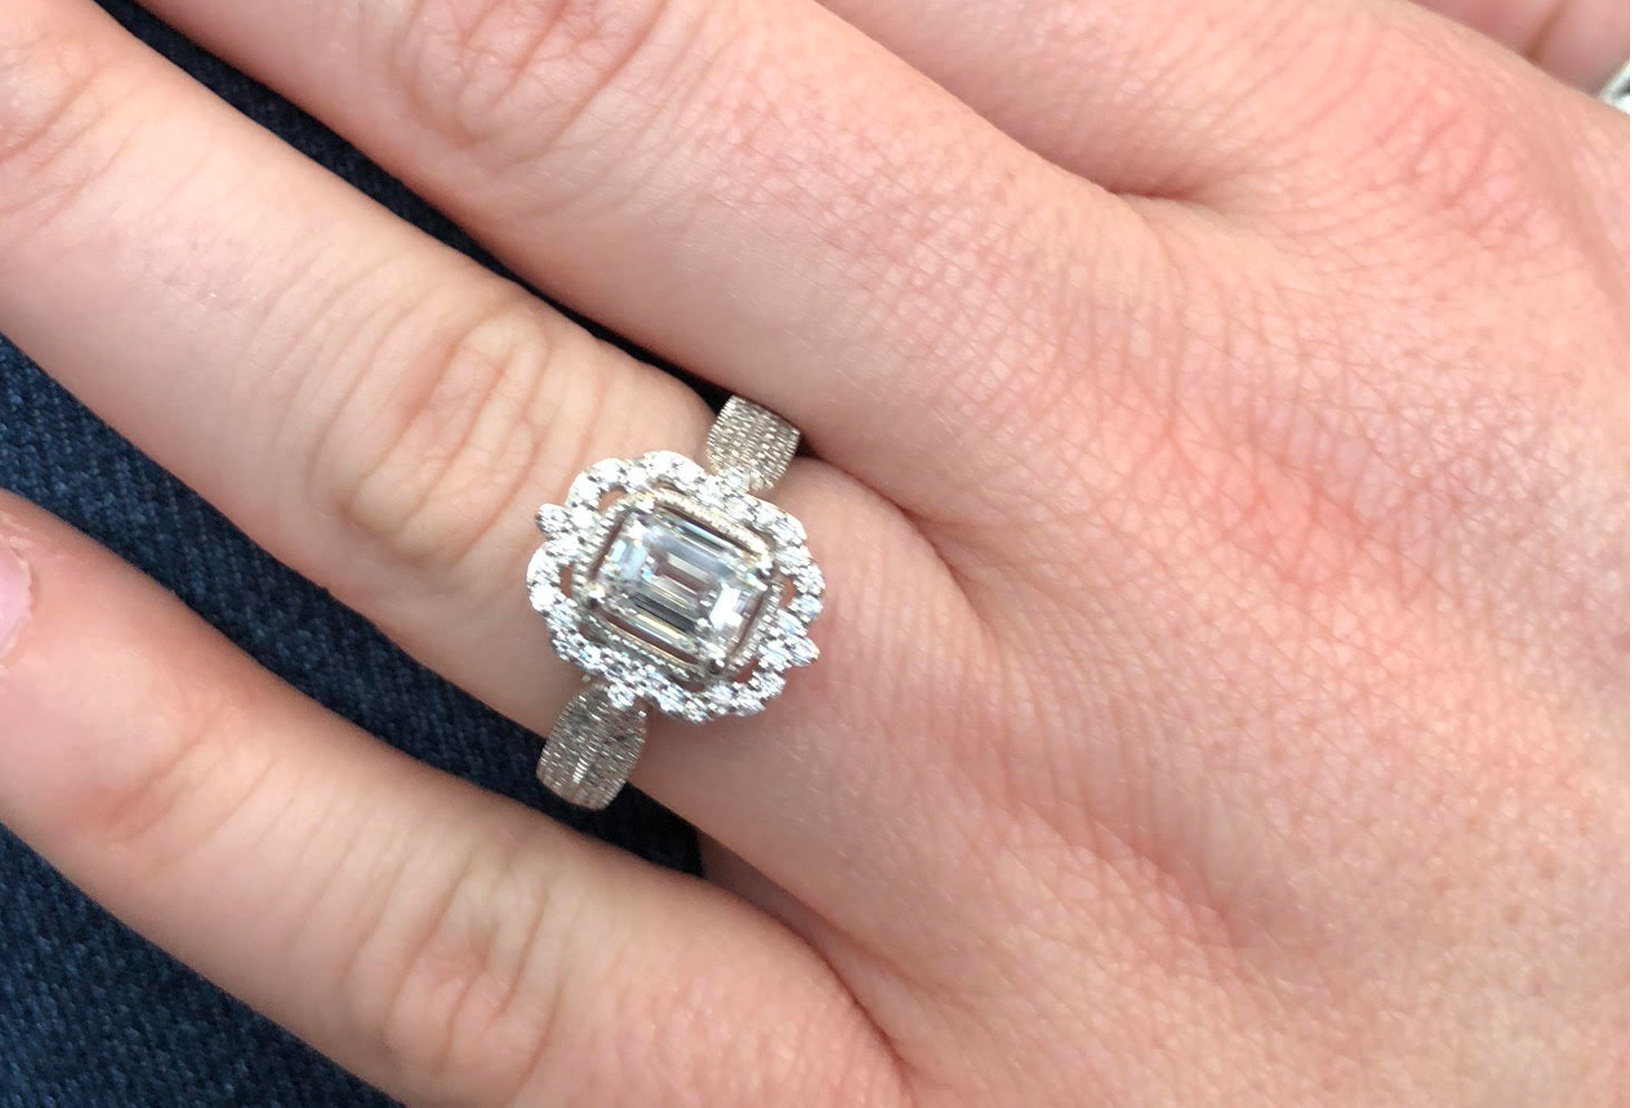 Close up image of a custom designed engagement ring